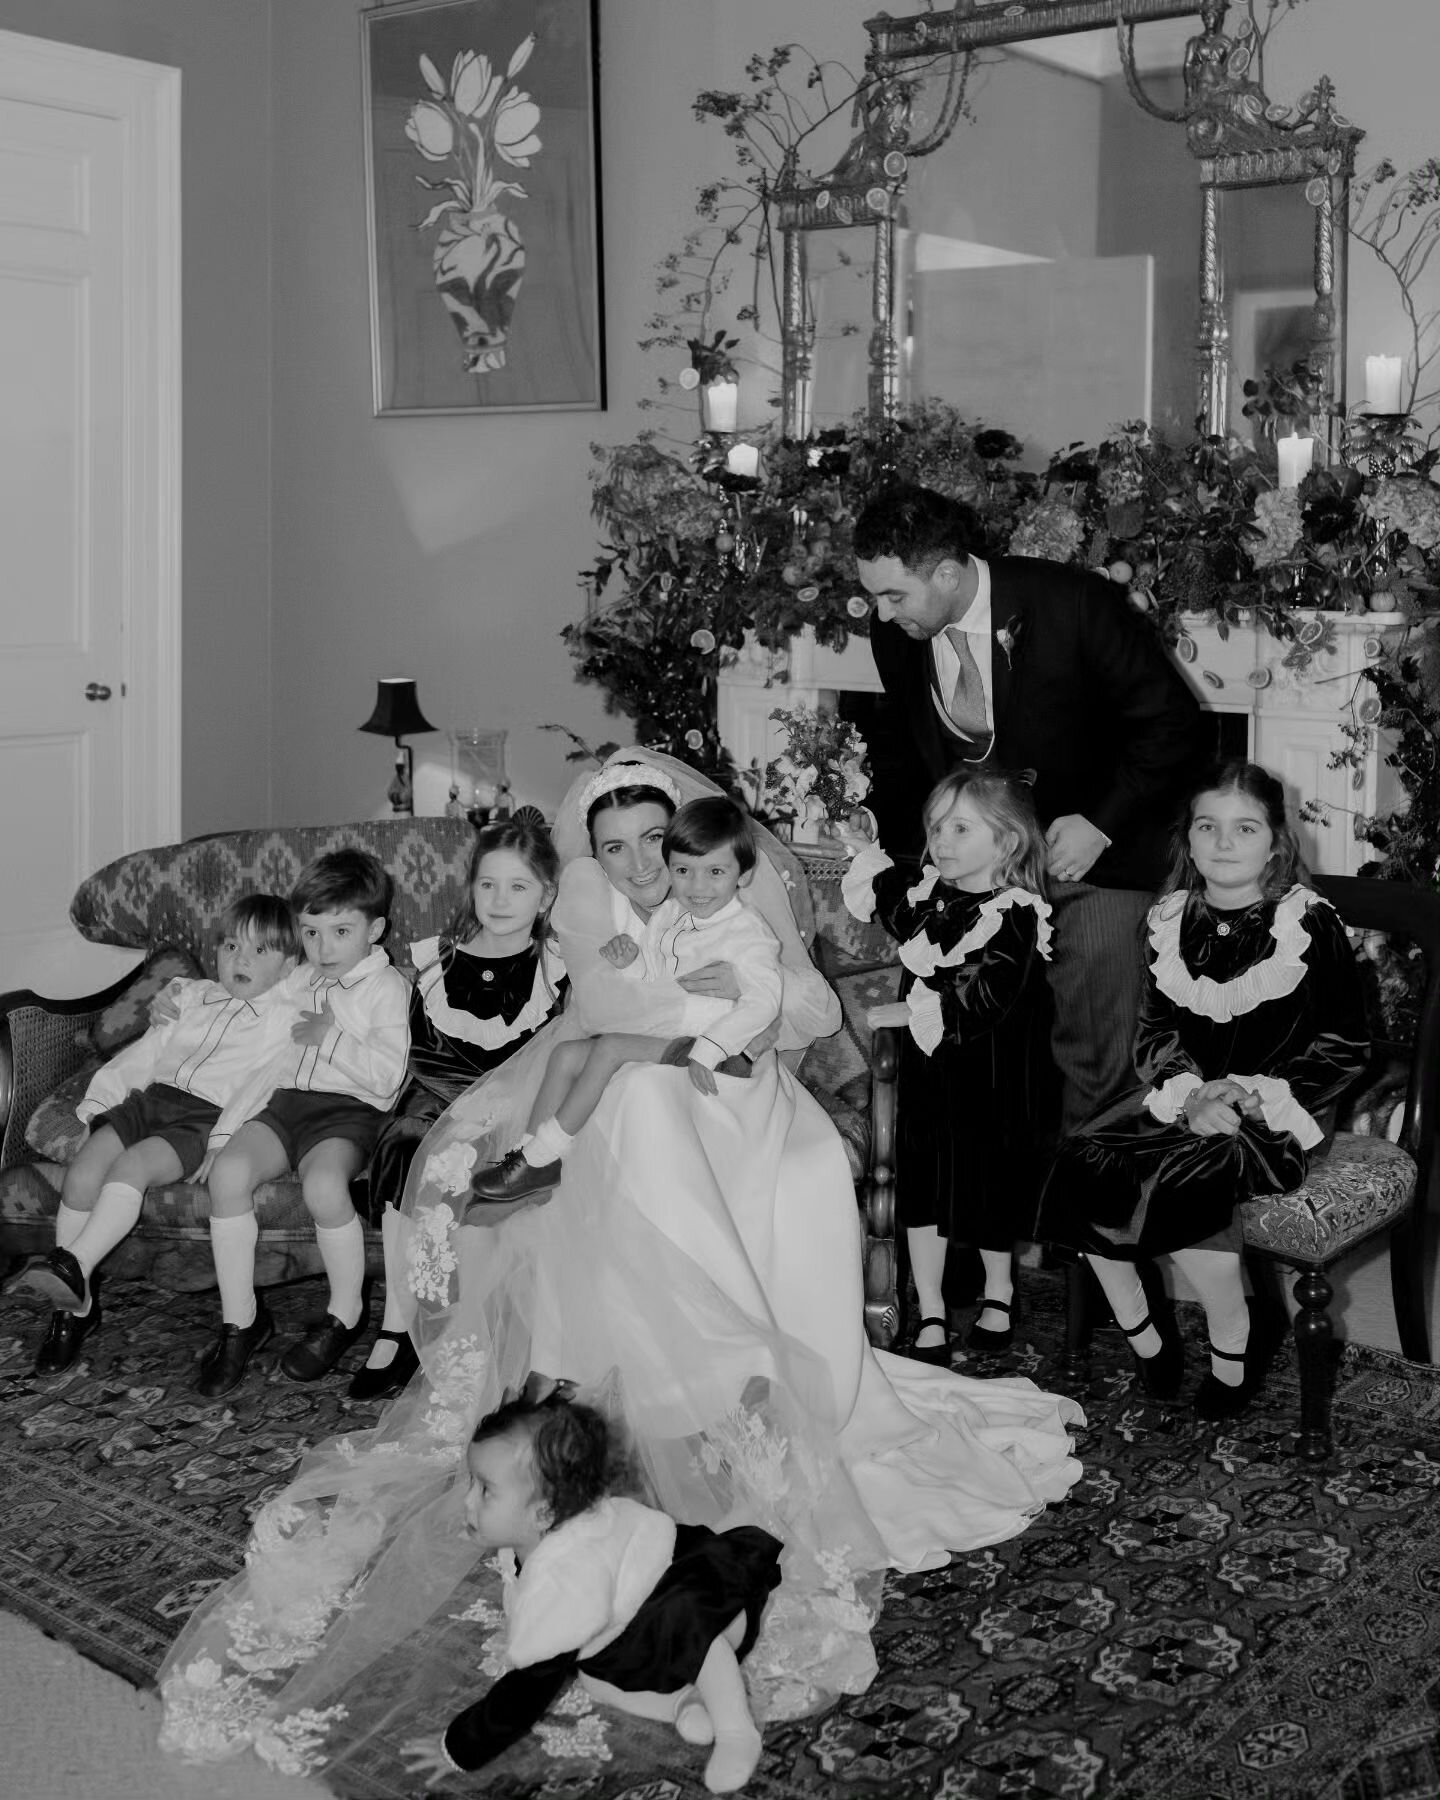 Absolutely my kind of group photo!

Becci and Nick, amidst the most adorable flower girls and page boys, in an (un)organized chaos 😉

It's those authentic, in-between moments that I love to capture the most.

Dress @carolinecastigliano
Venue @wilder